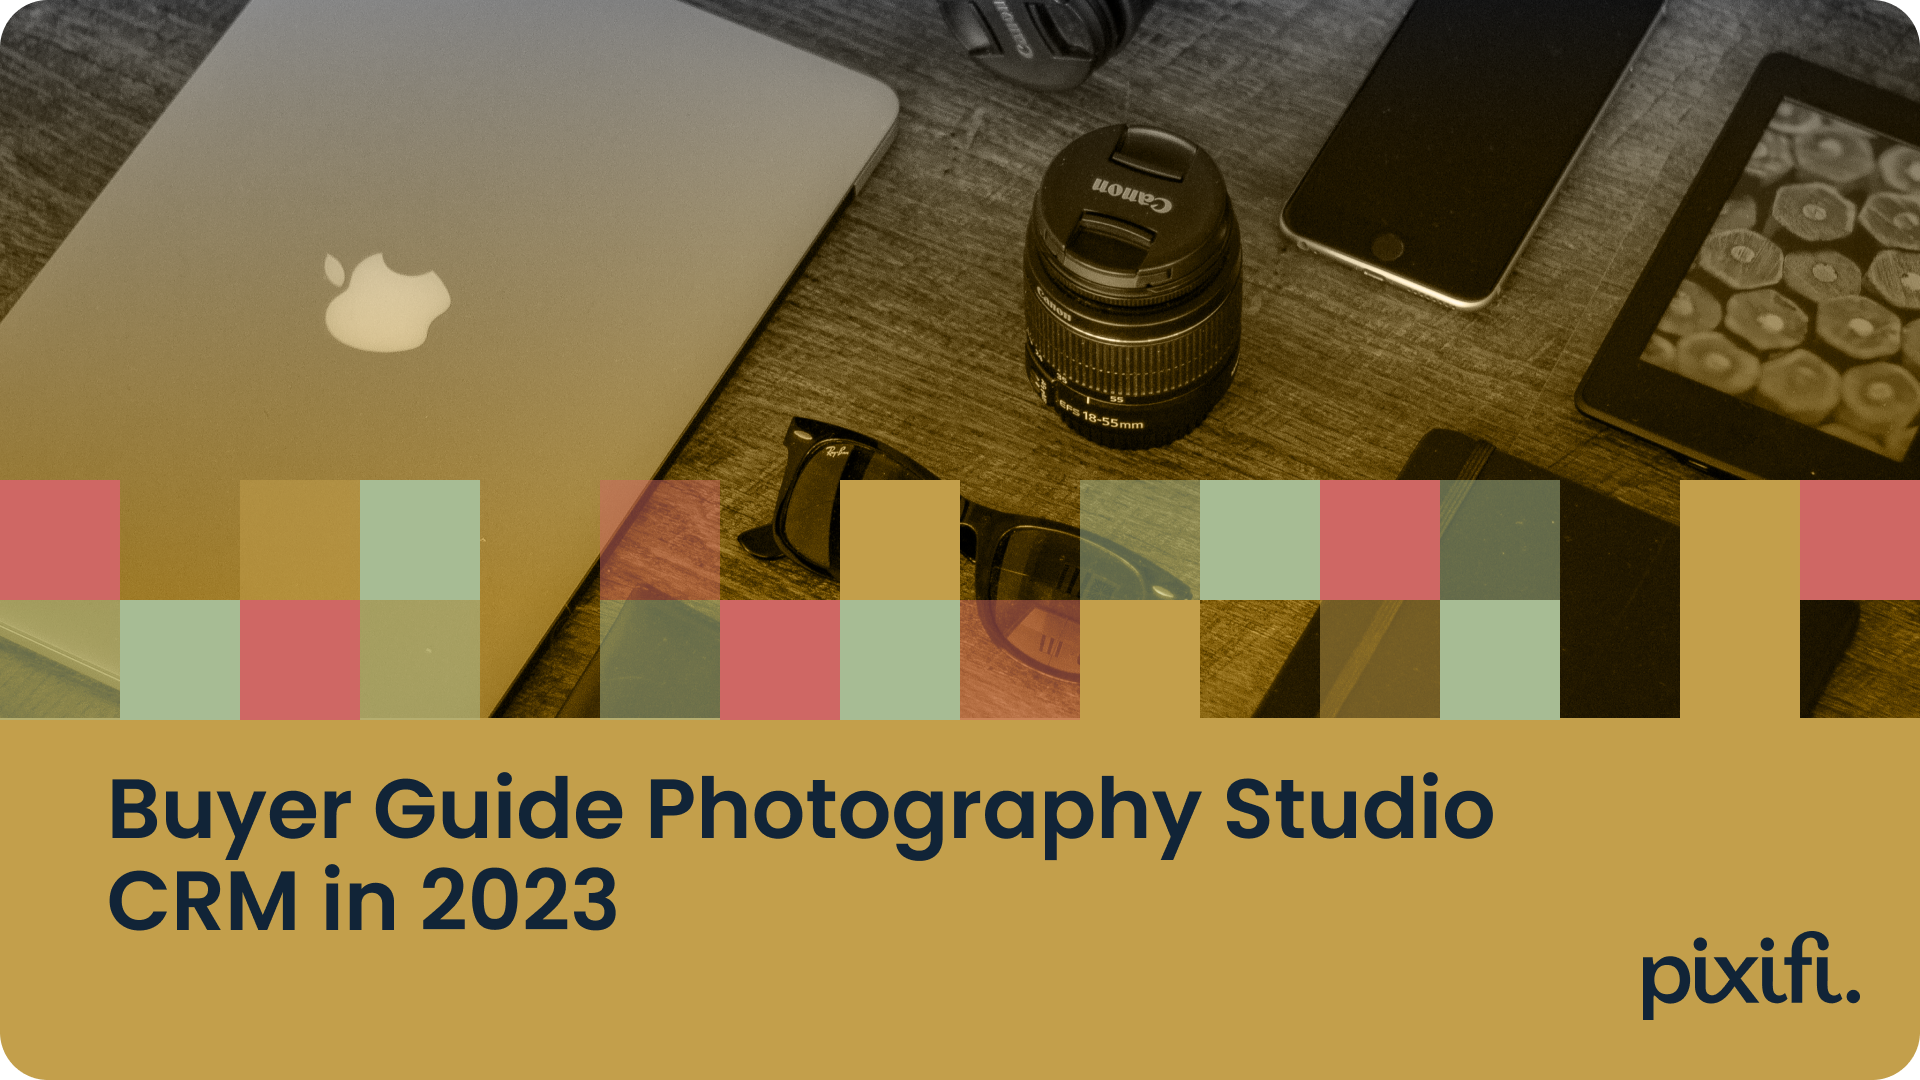 Buyer Guide Photography Studio CRM in 2023